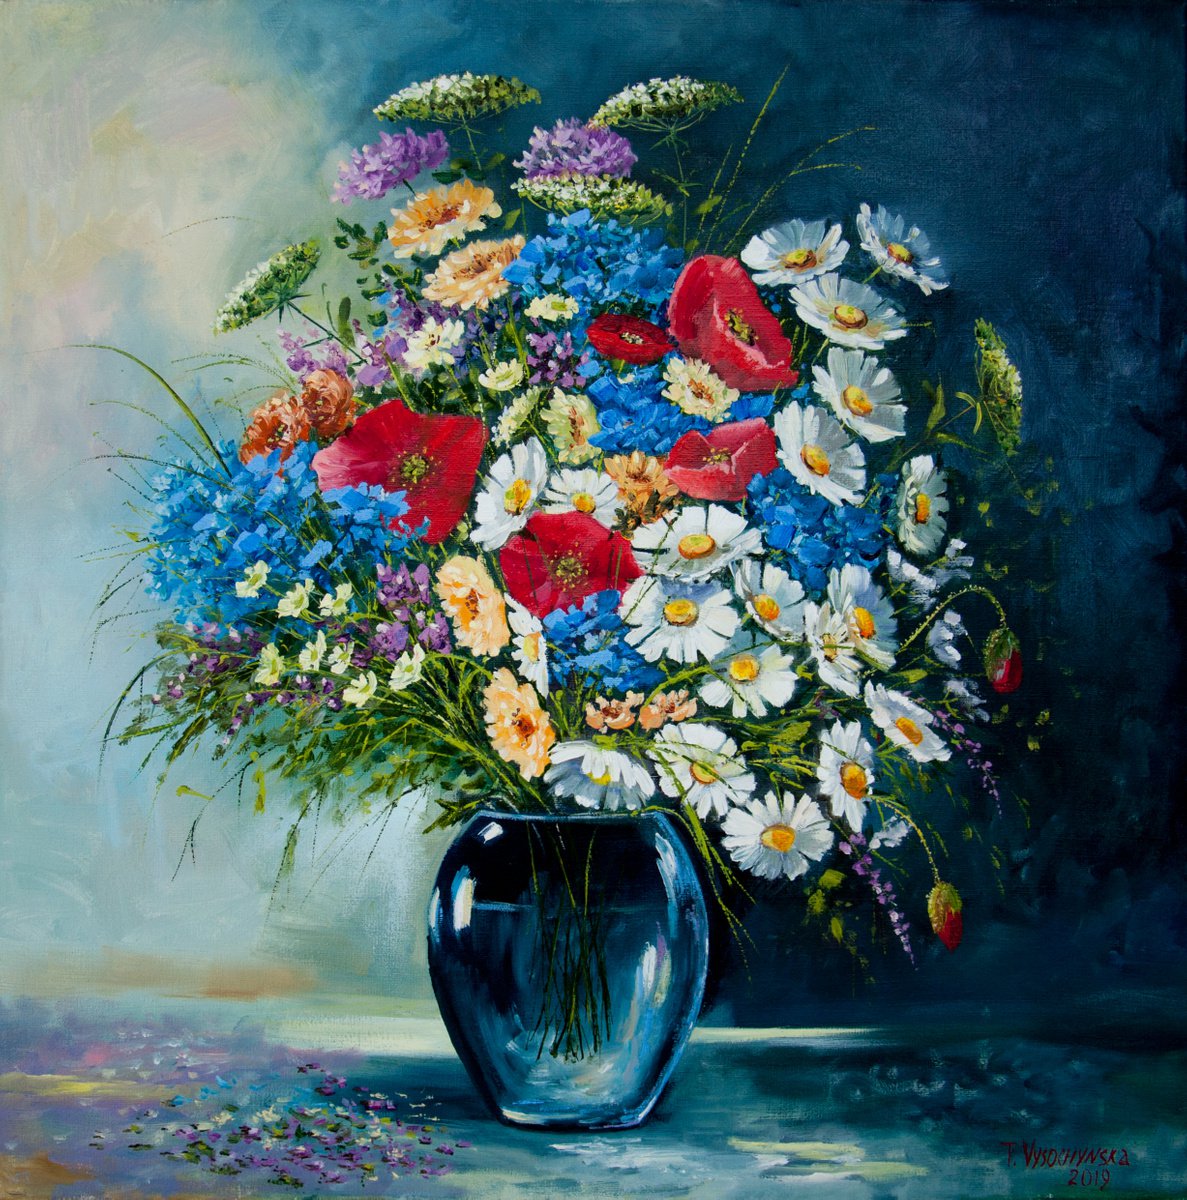 Bouquet of wildflowers. Oil painting. 16 x 16in. by Tetiana Vysochynska